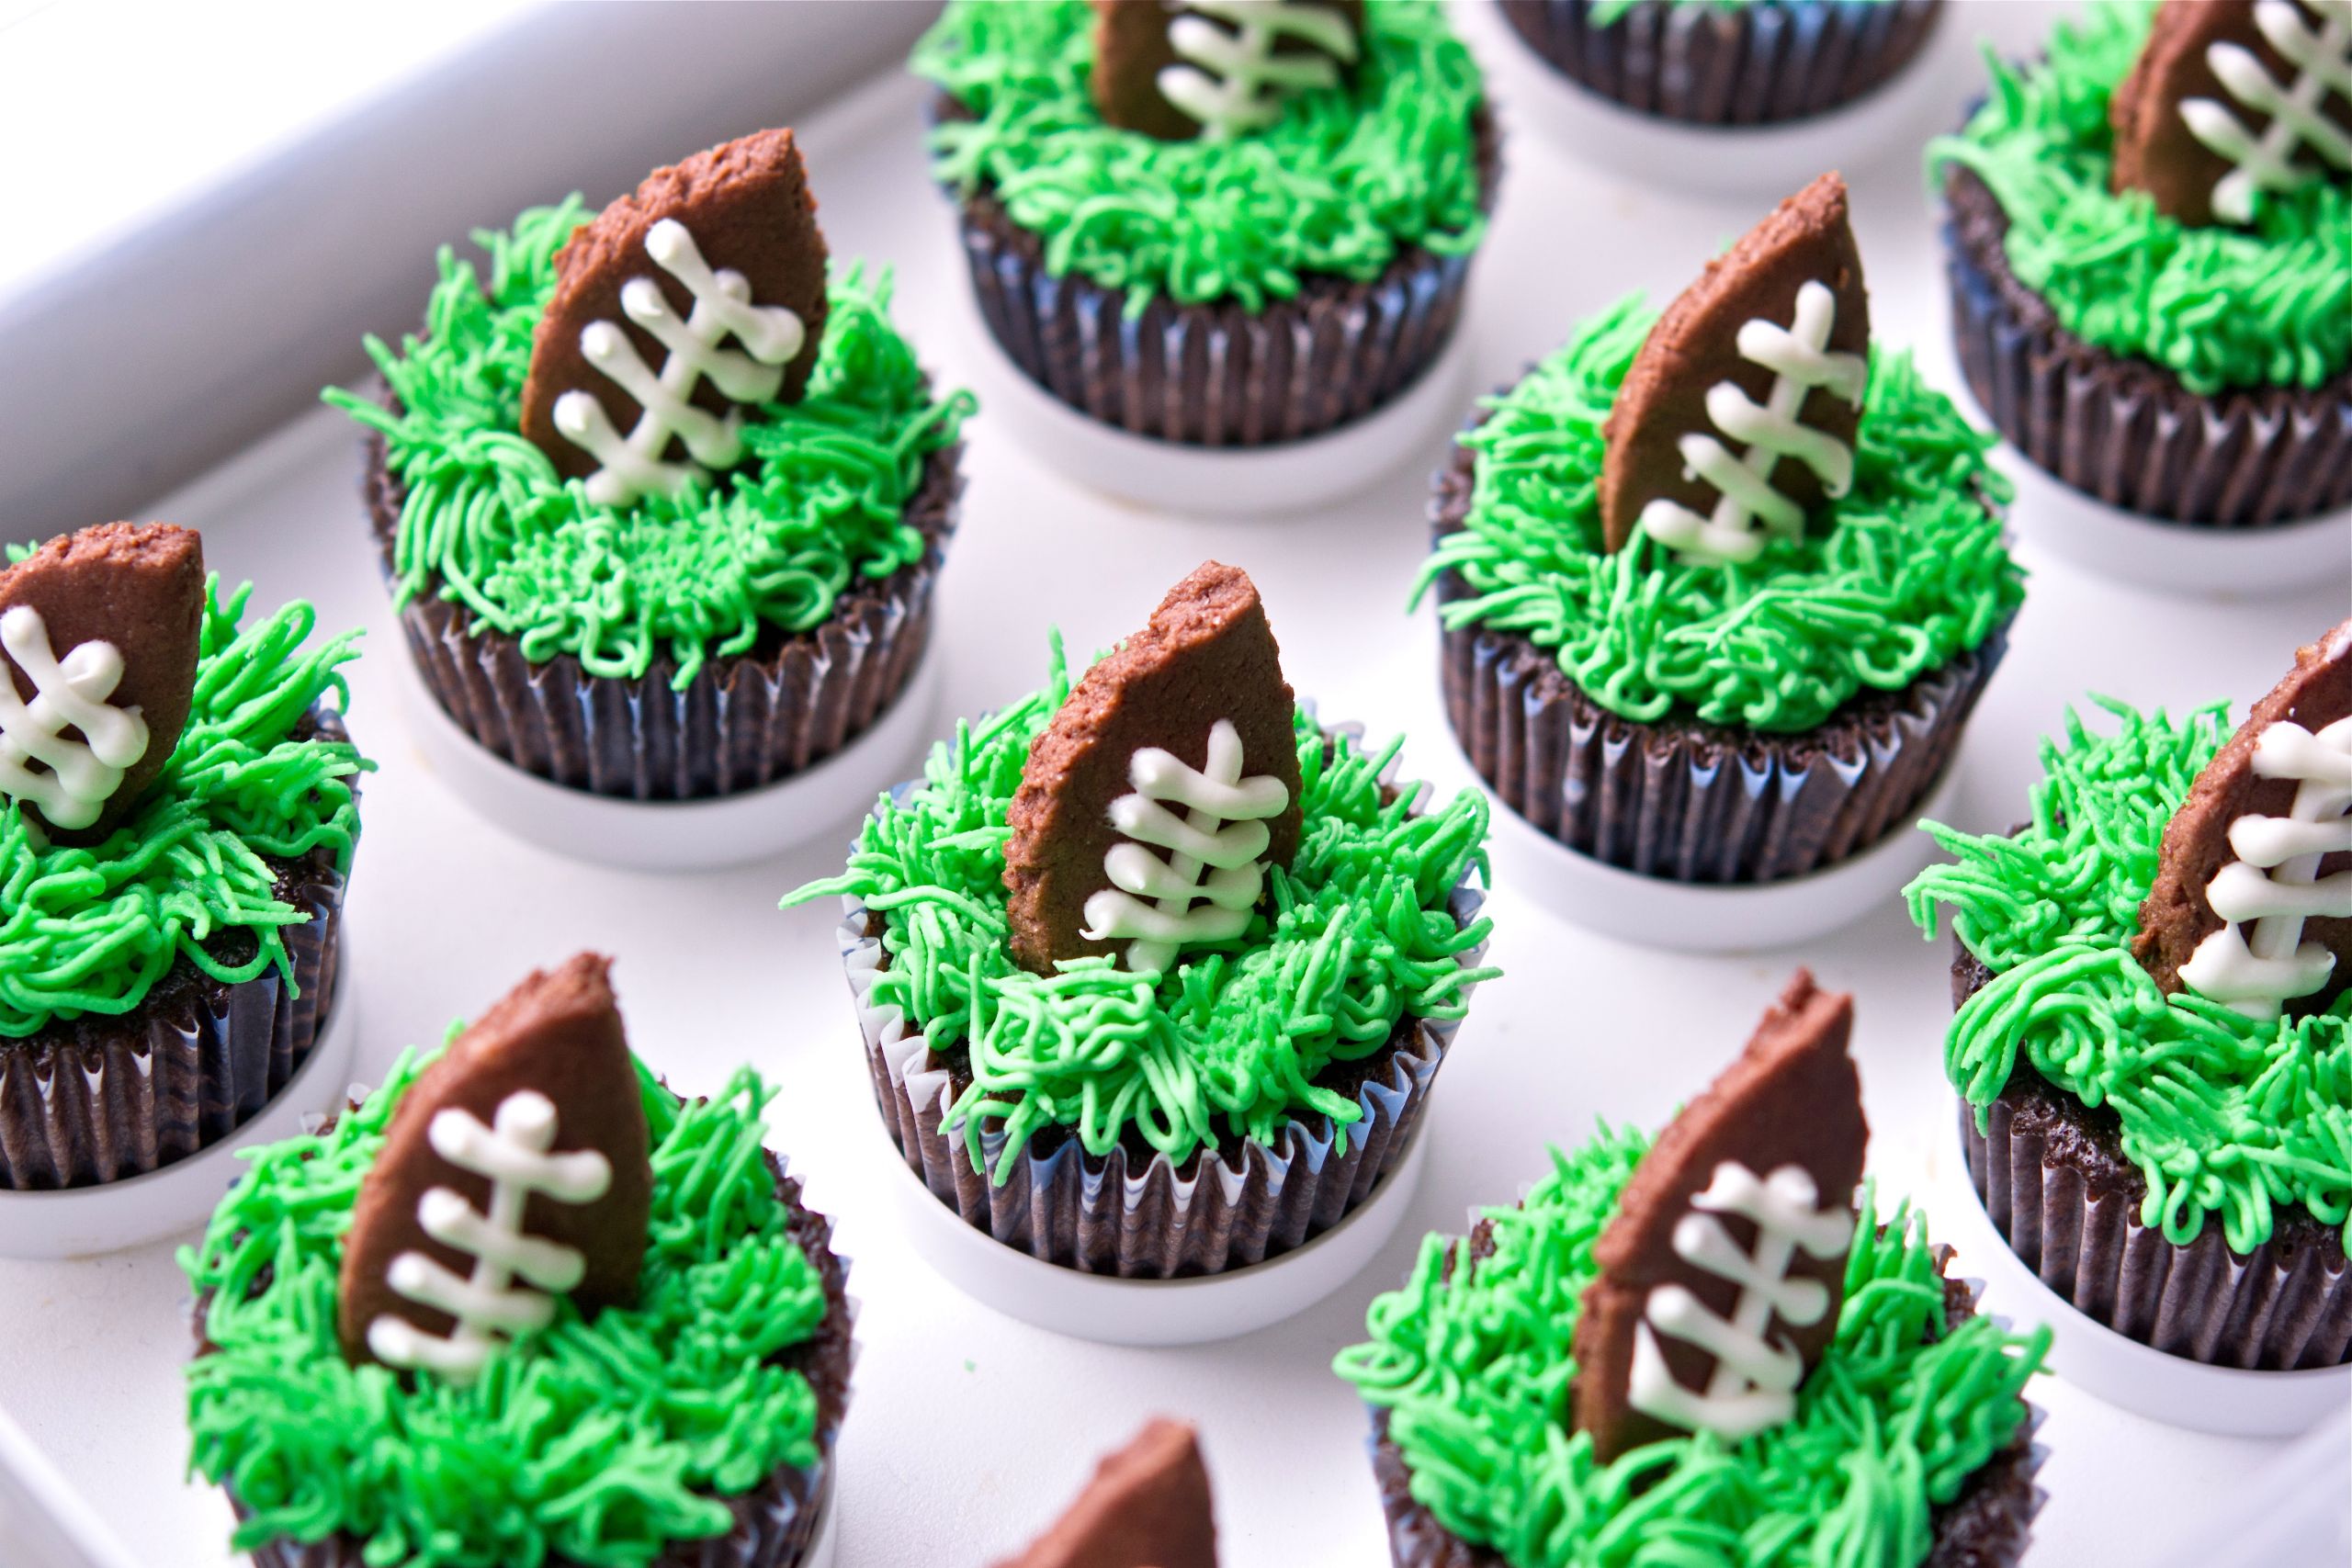 Super Bowl Cupcake Recipes
 Victory Never Tasted So Sweet